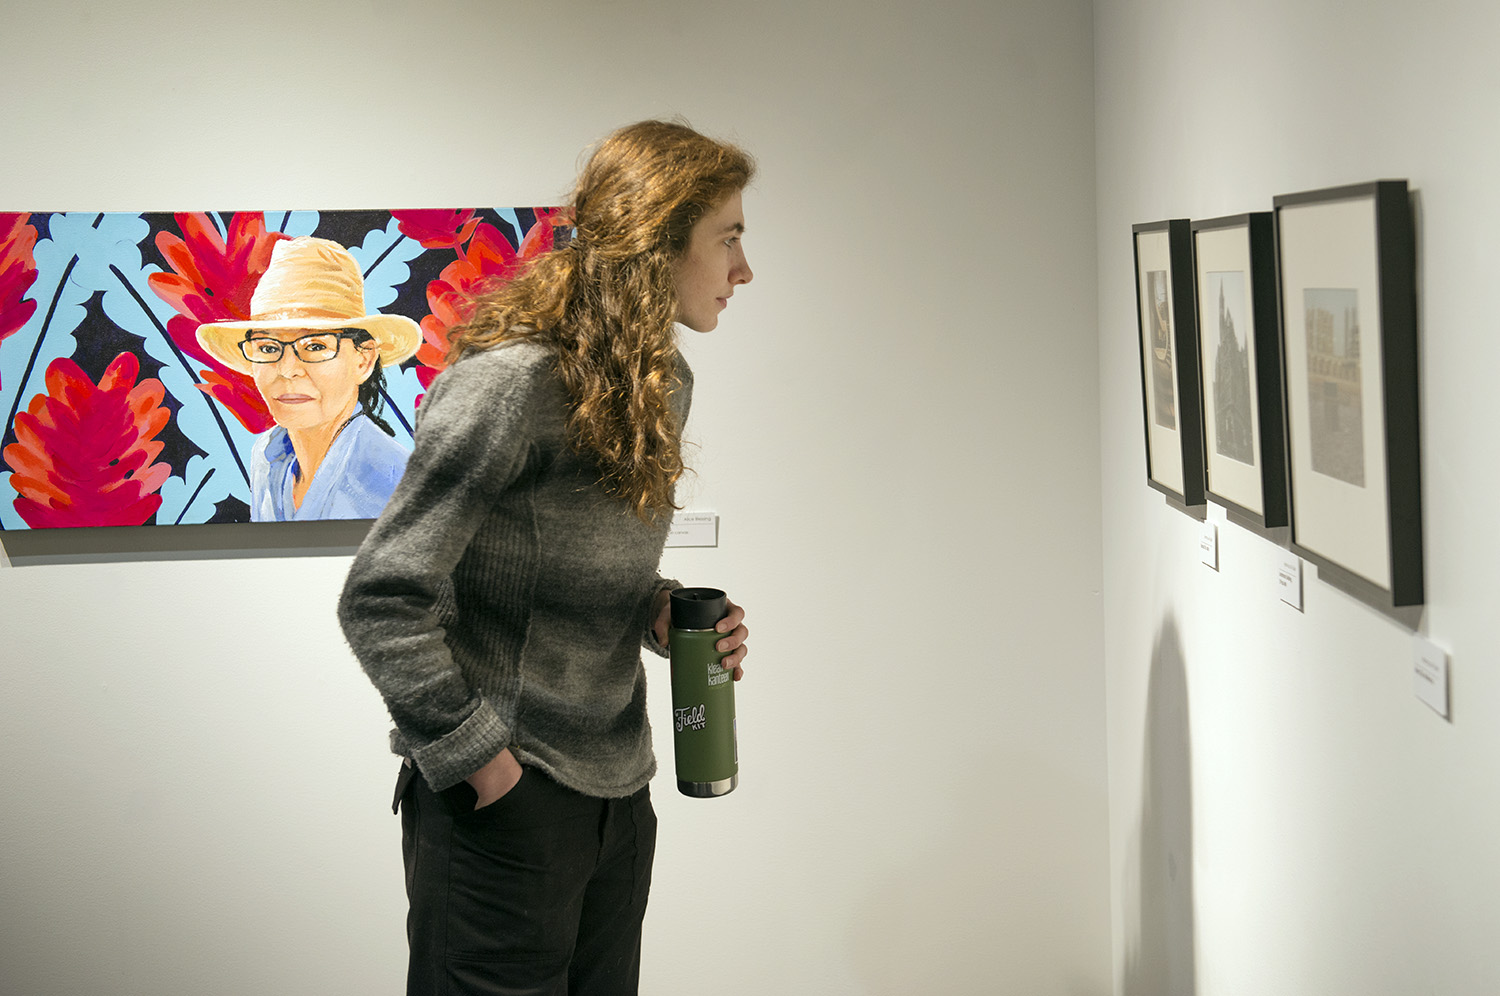 Bemidji State student admiring drawings during a TAD Faculty Art Show 2019